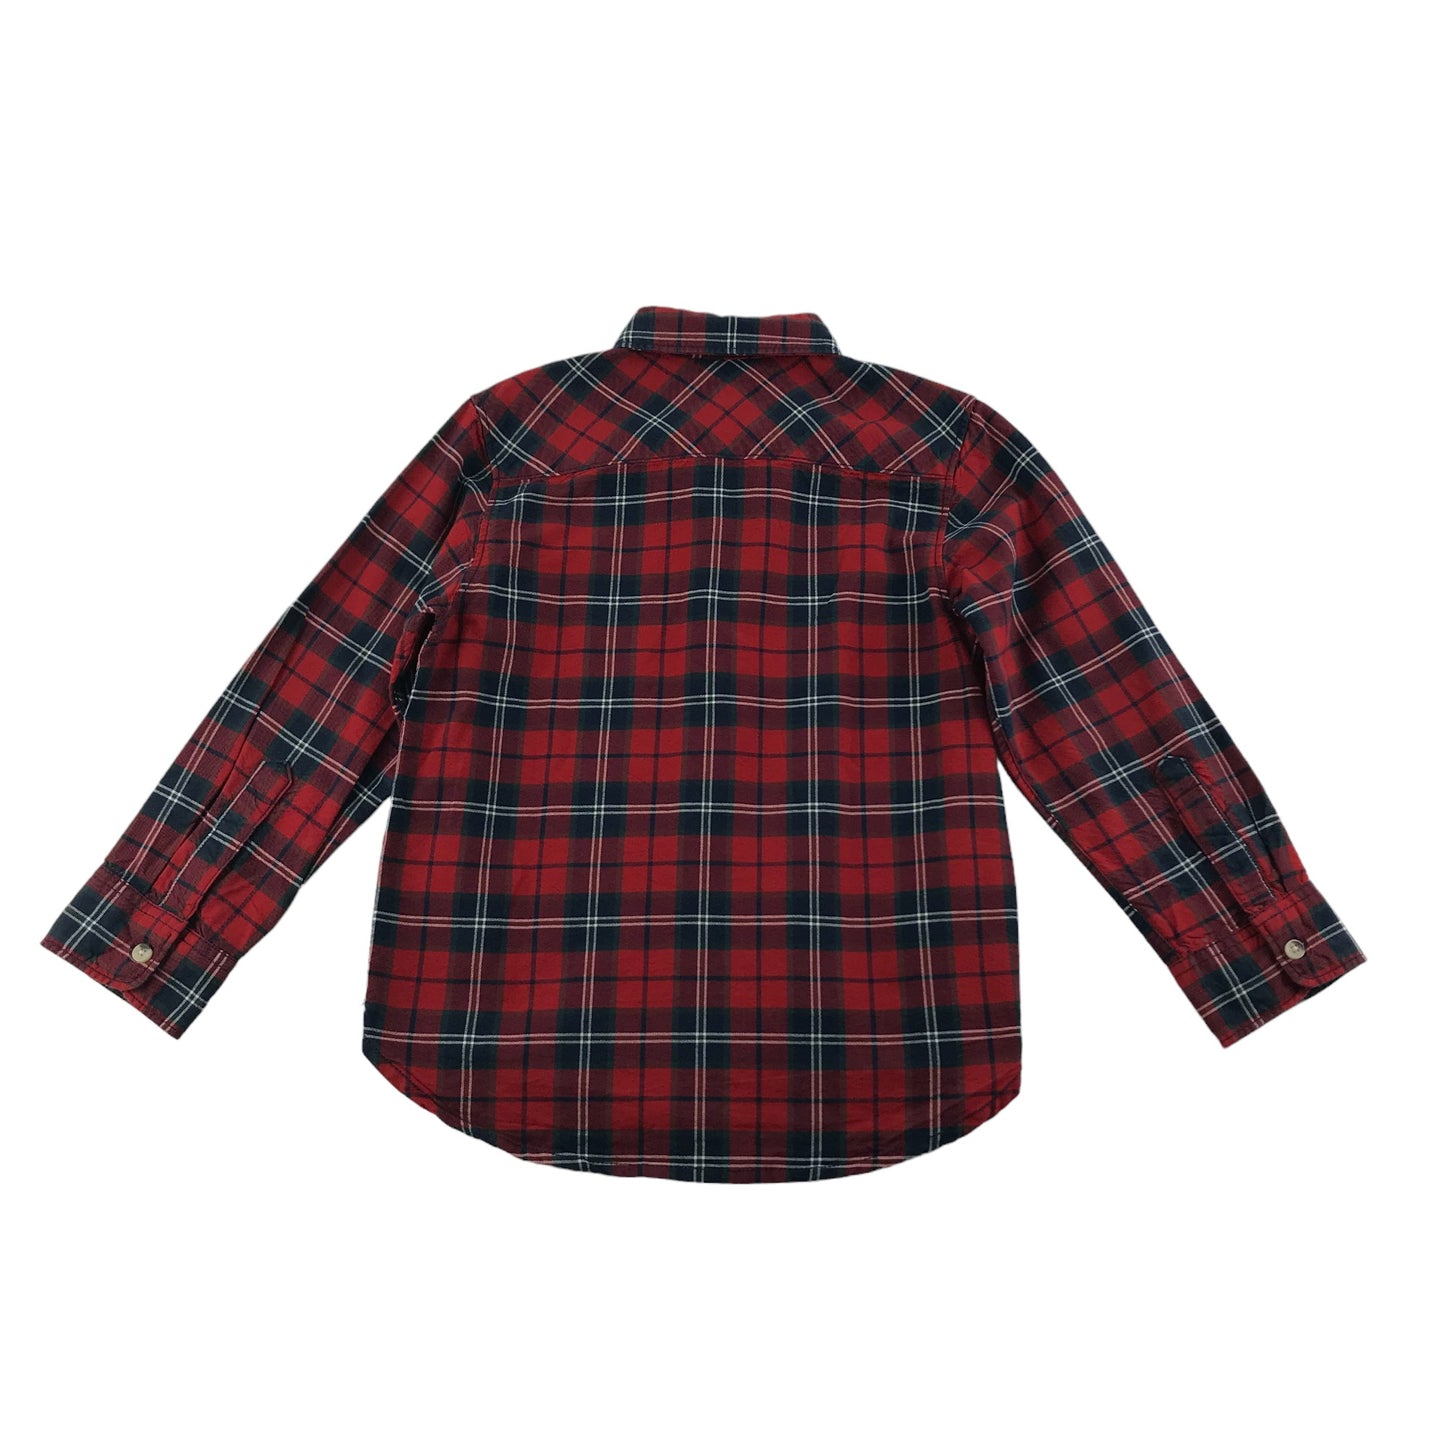 H&M Shirt Age 5 Red Navy Check Pattern Long Sleeve Button Up Cotton